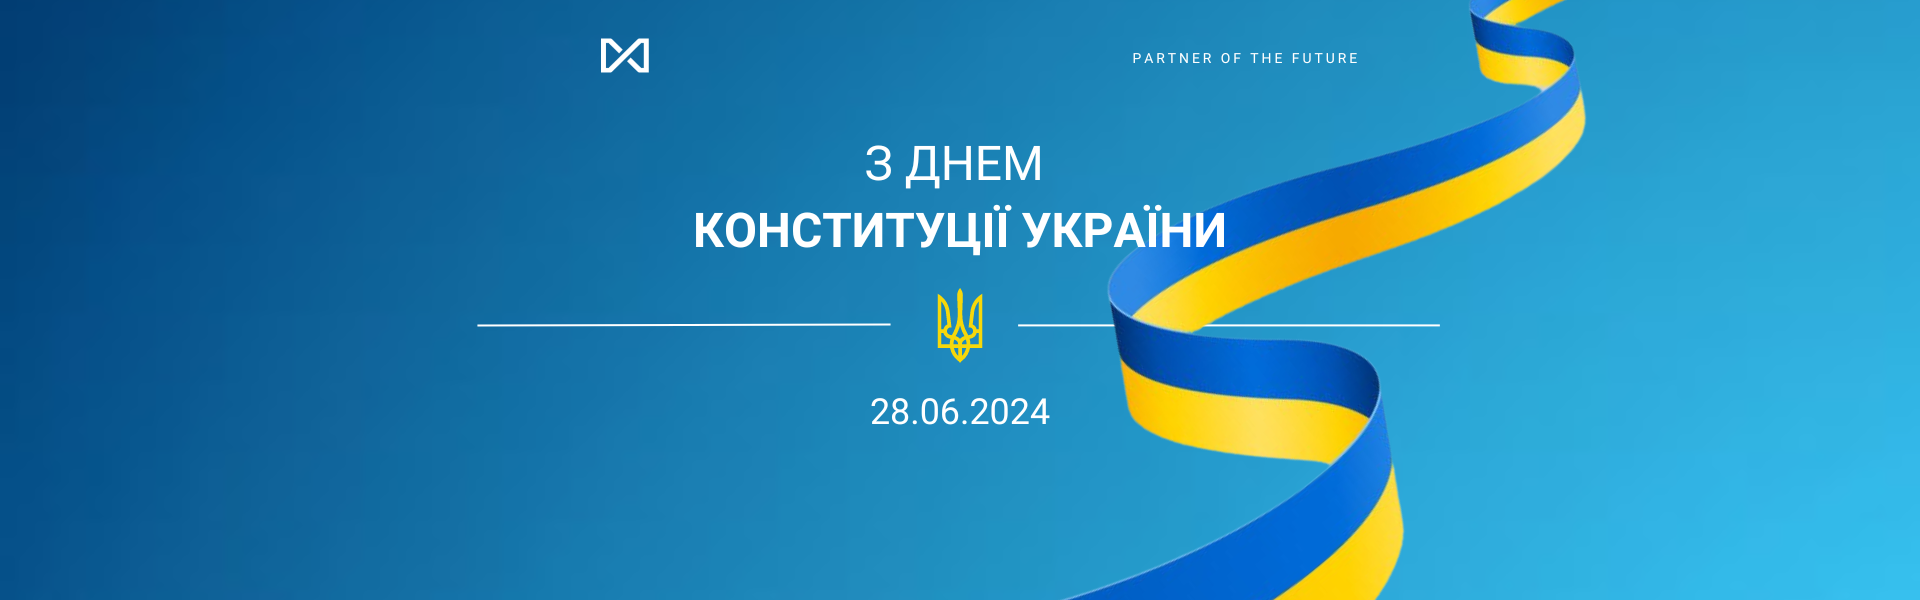 EVERLEGAL team sincerely congratulates you on the Constitution Day of Ukraine